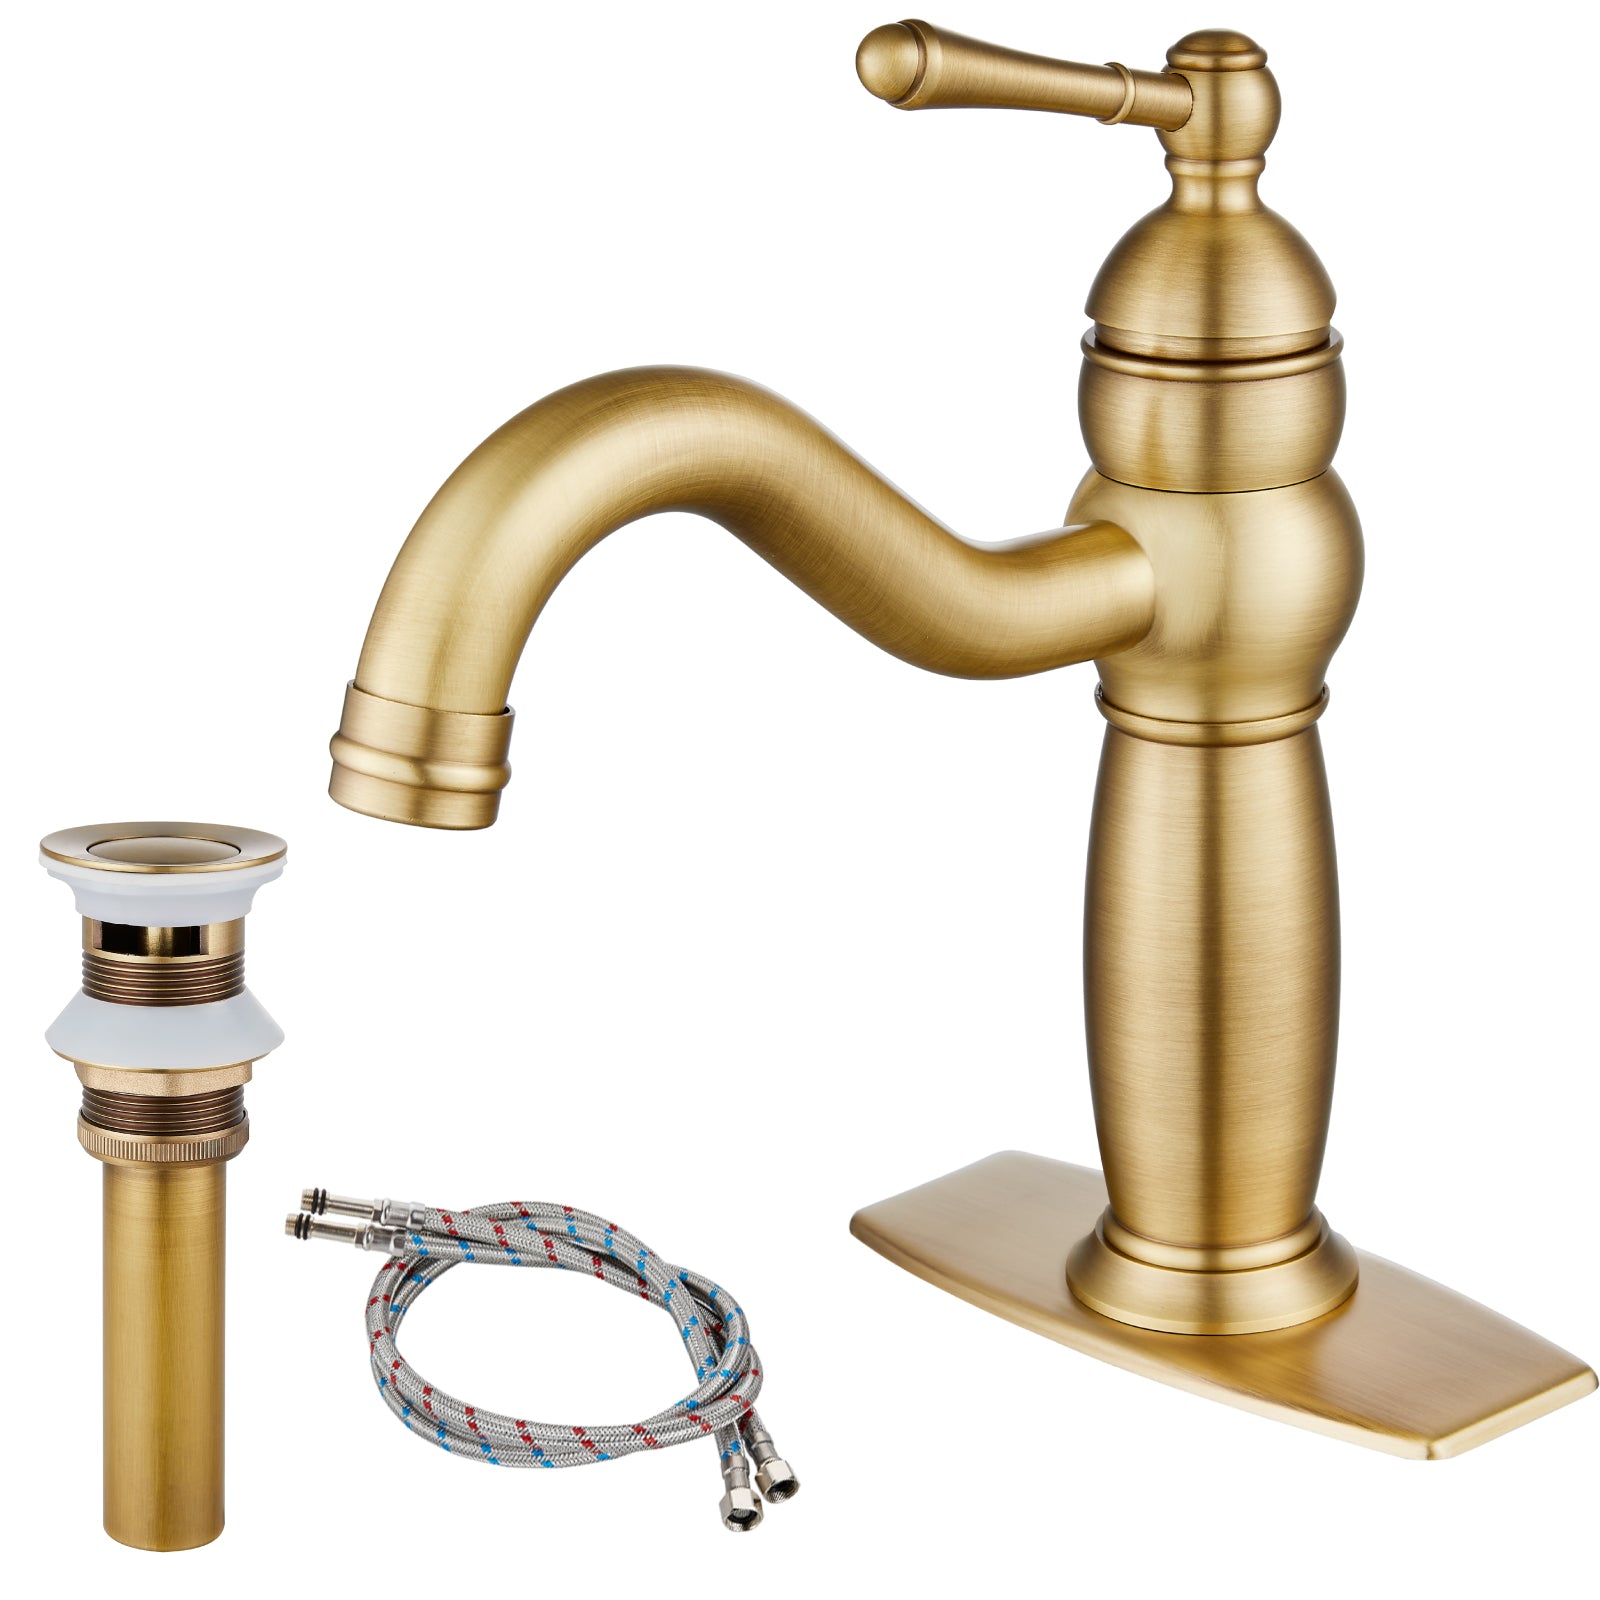 Heyalan Bathroom Faucet Brass Lavatory Sink Faucet Vanity Basin Single Hole Vintage Vessel Mixer Tap Deck Mounted Retro Hot and Cold Water Handle Solid Brass Pop-up Drain Included